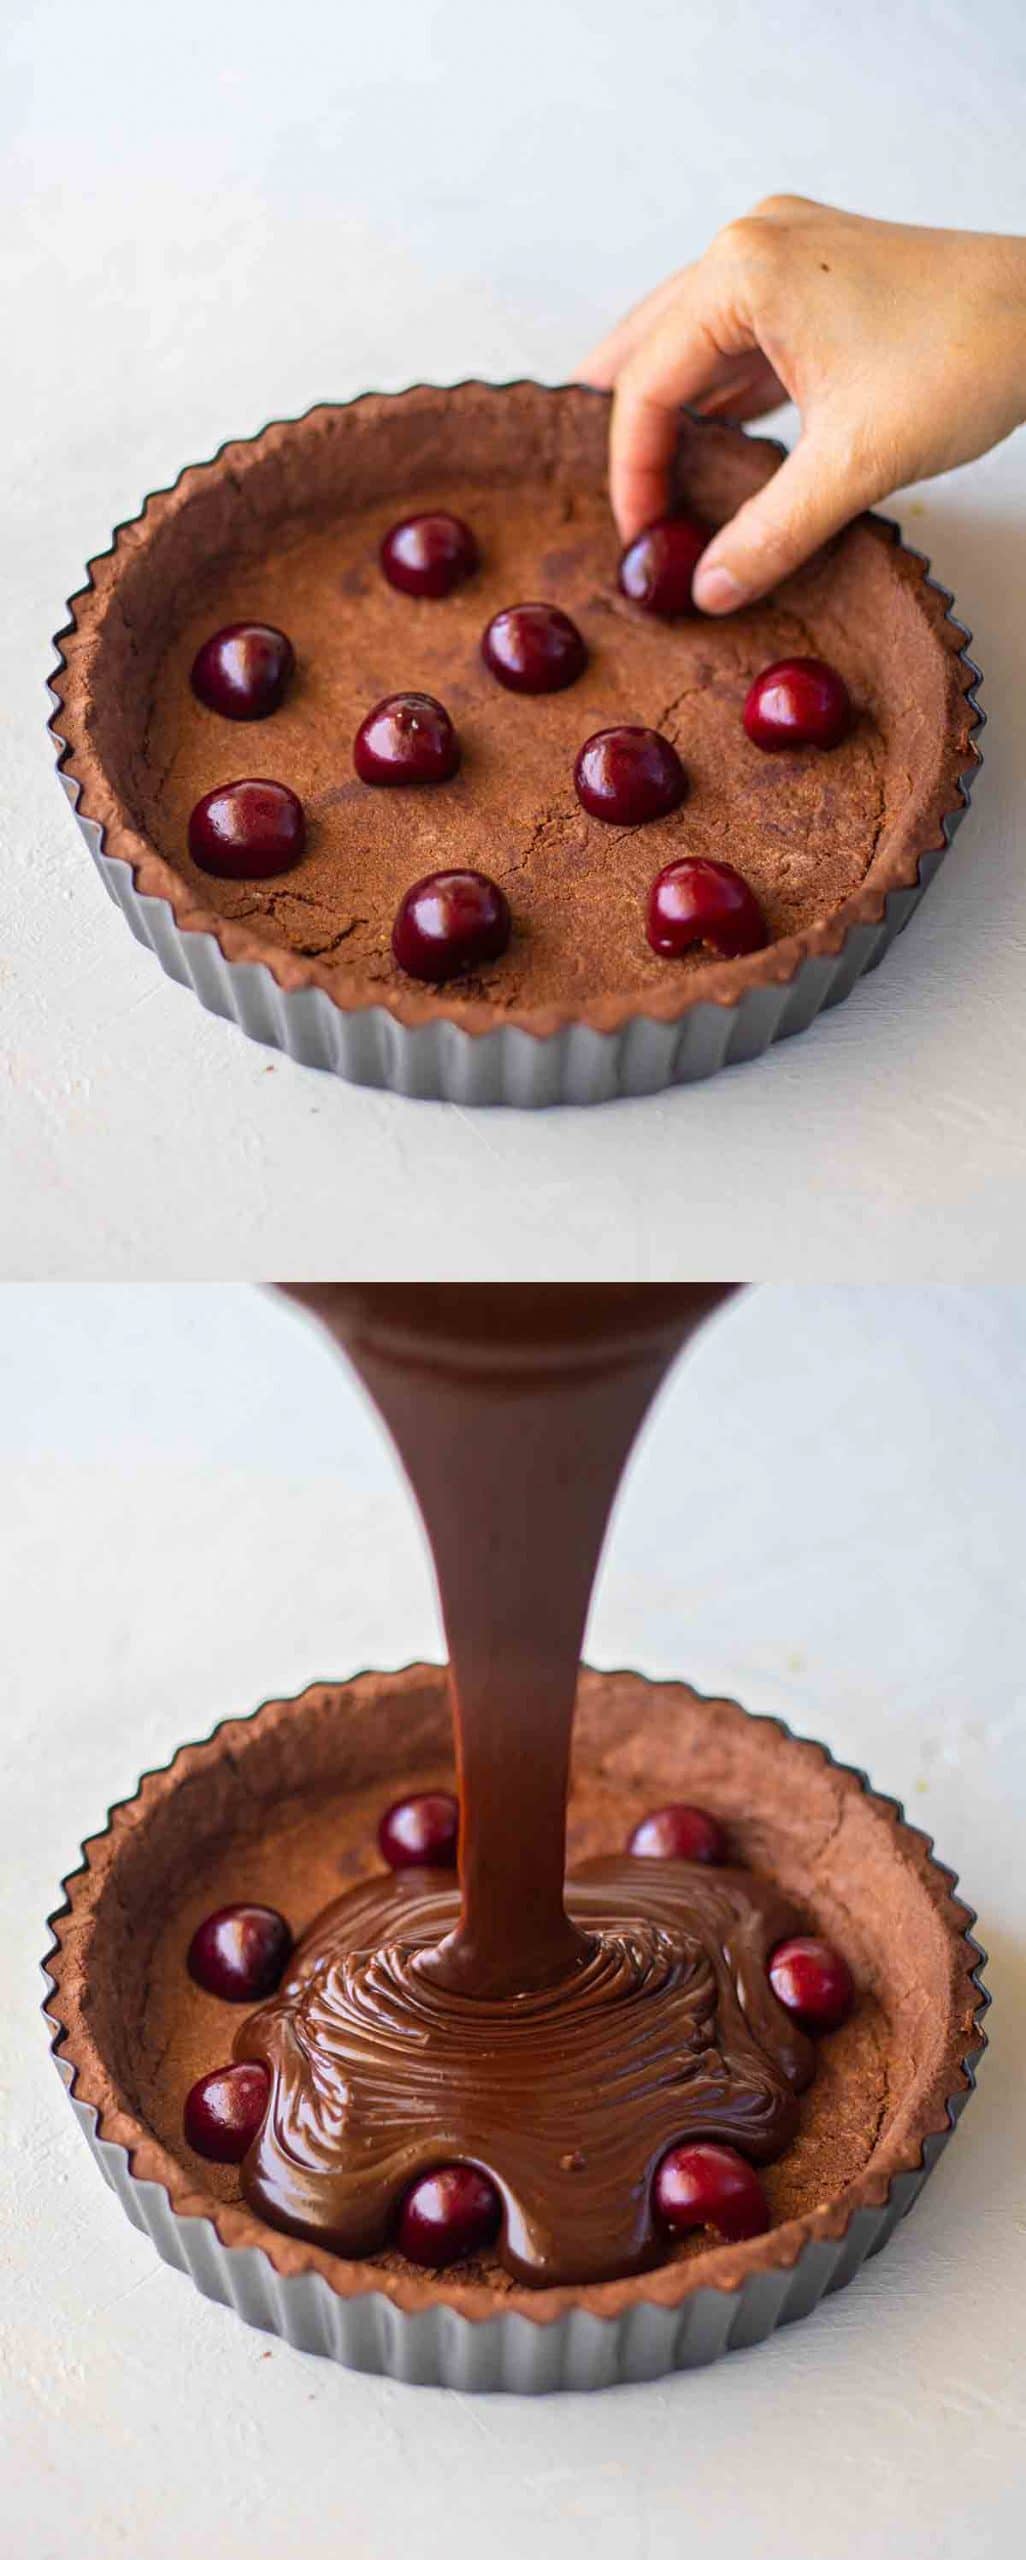 Two image collage placing halved cherries on a baked tart crust and luxurious chocolate ganache poured into crust.